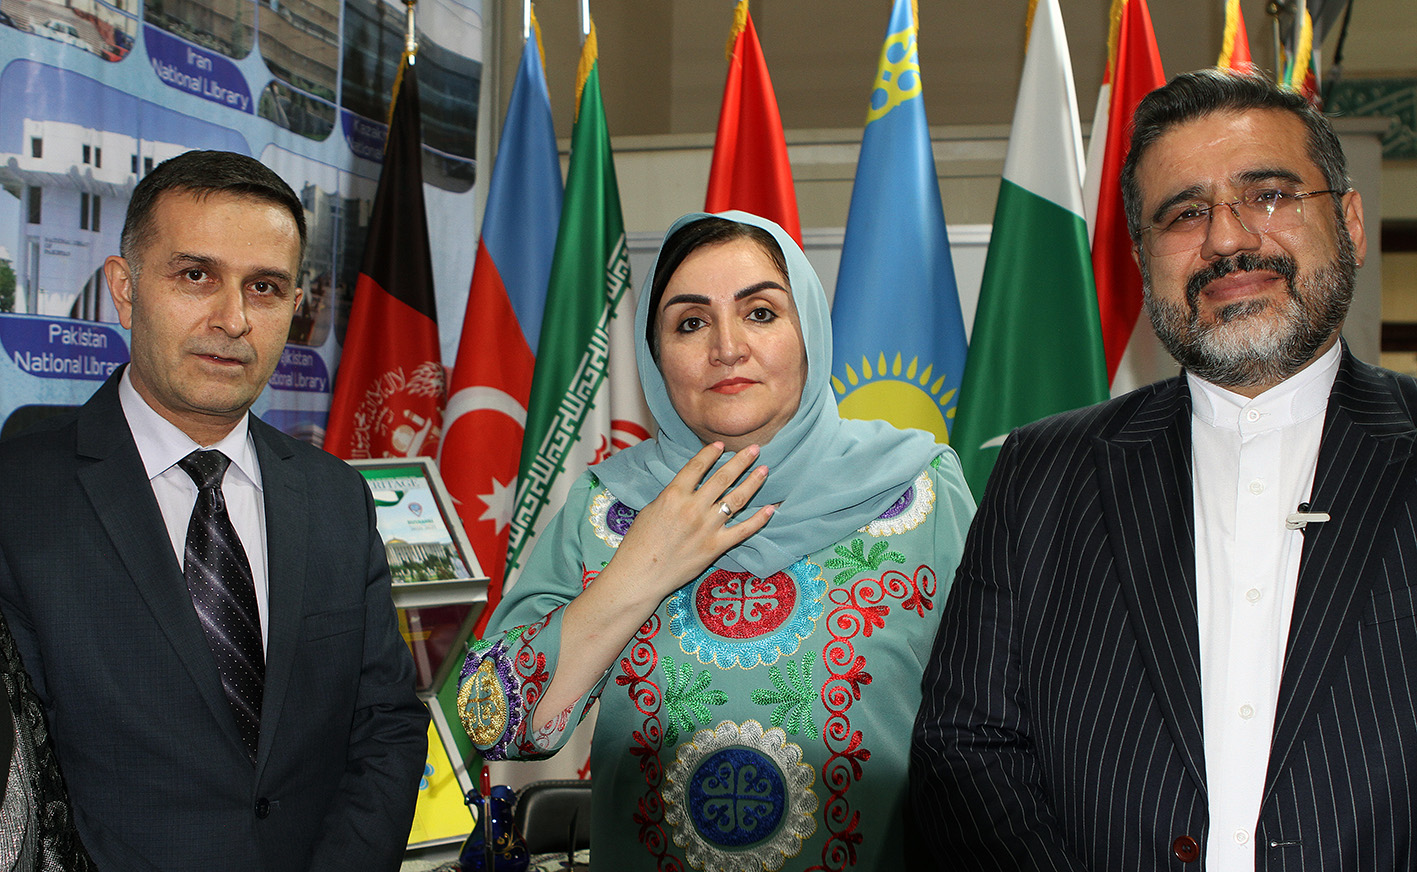 Ministers of Culture of Iran and Tajikistan visited the ECOCI&#39;s publication stall